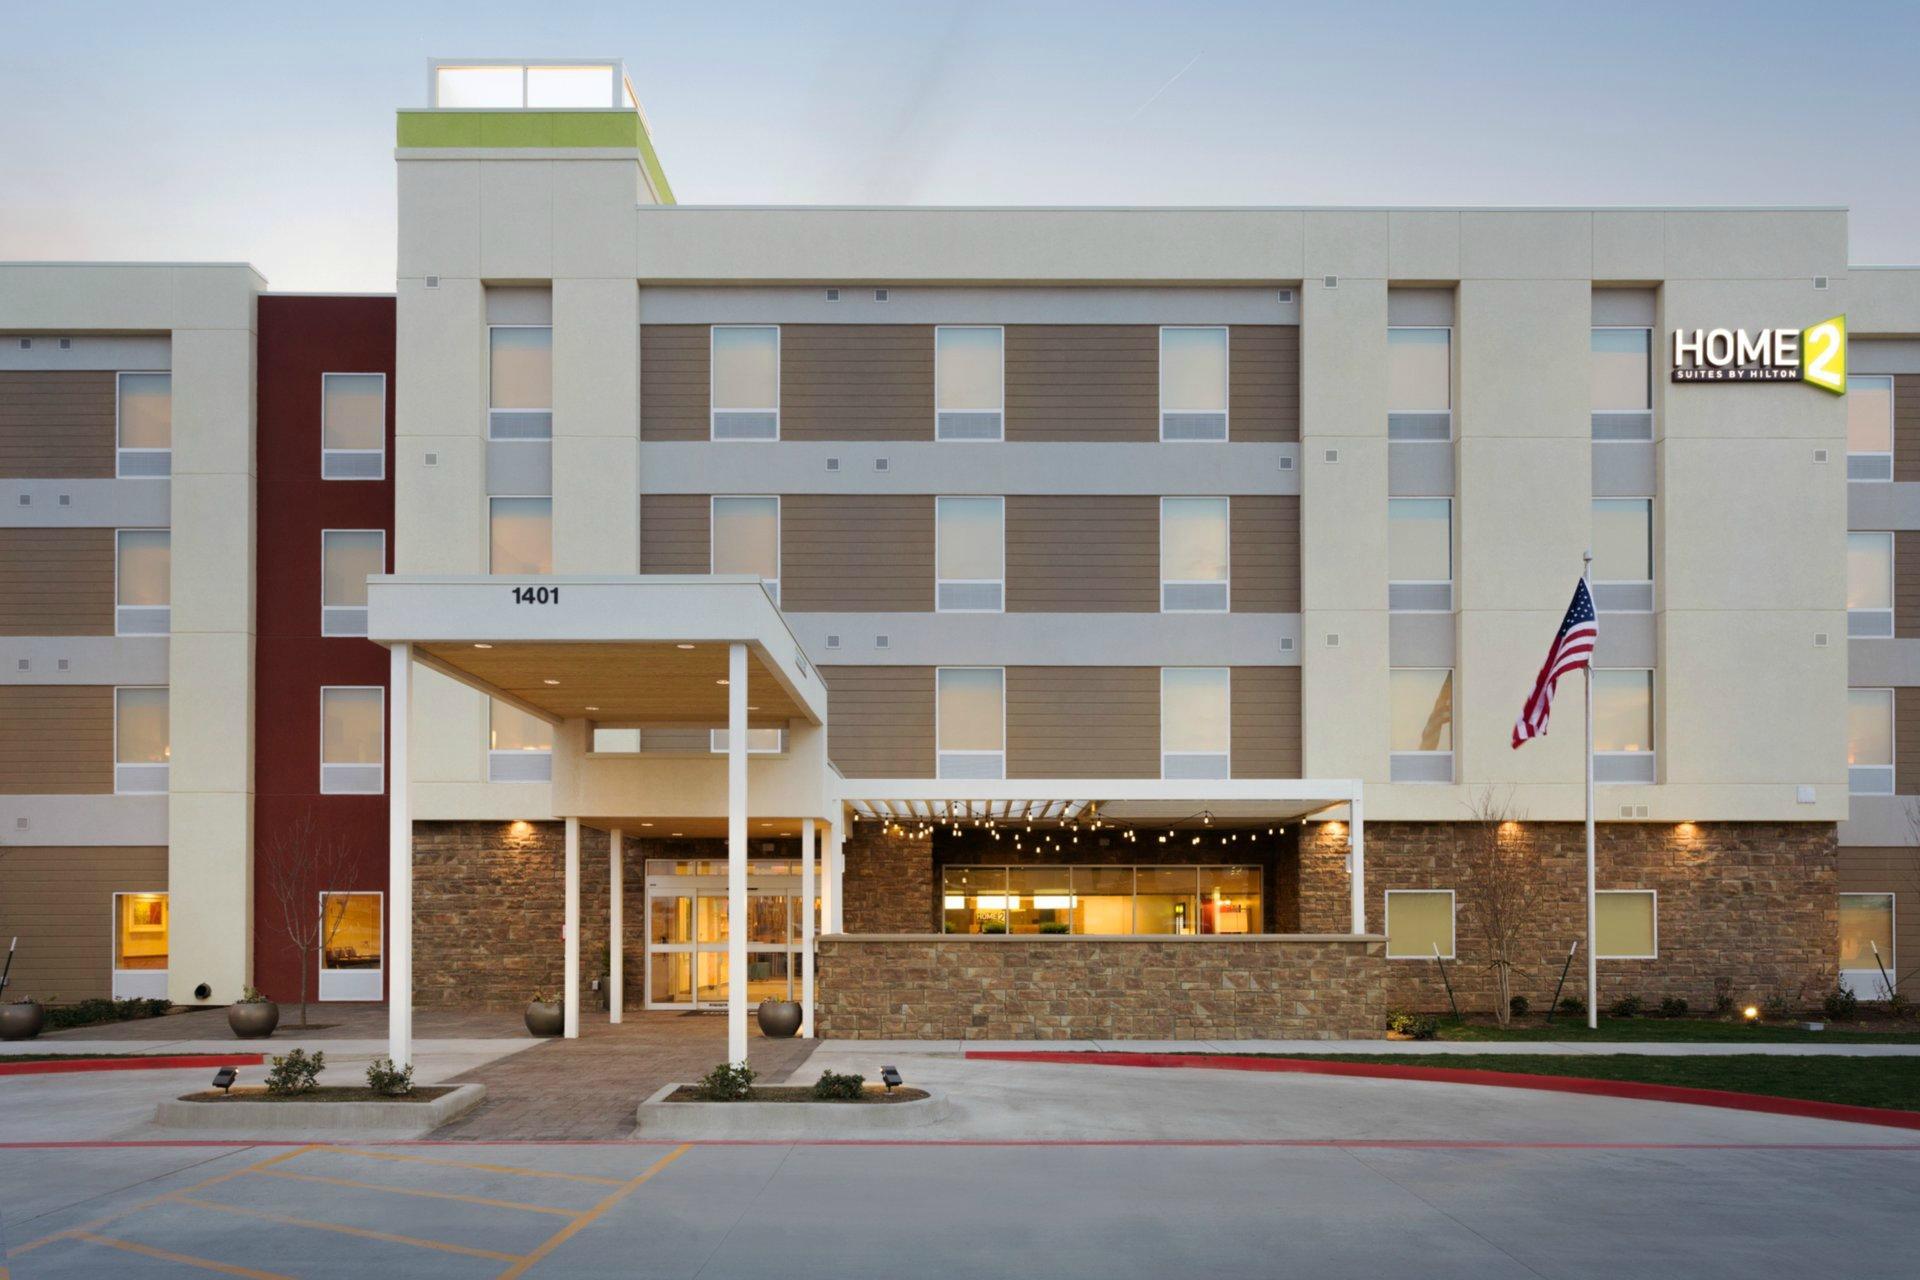 Photo of Home2 Suites by Hilton Midland, Midland, TX